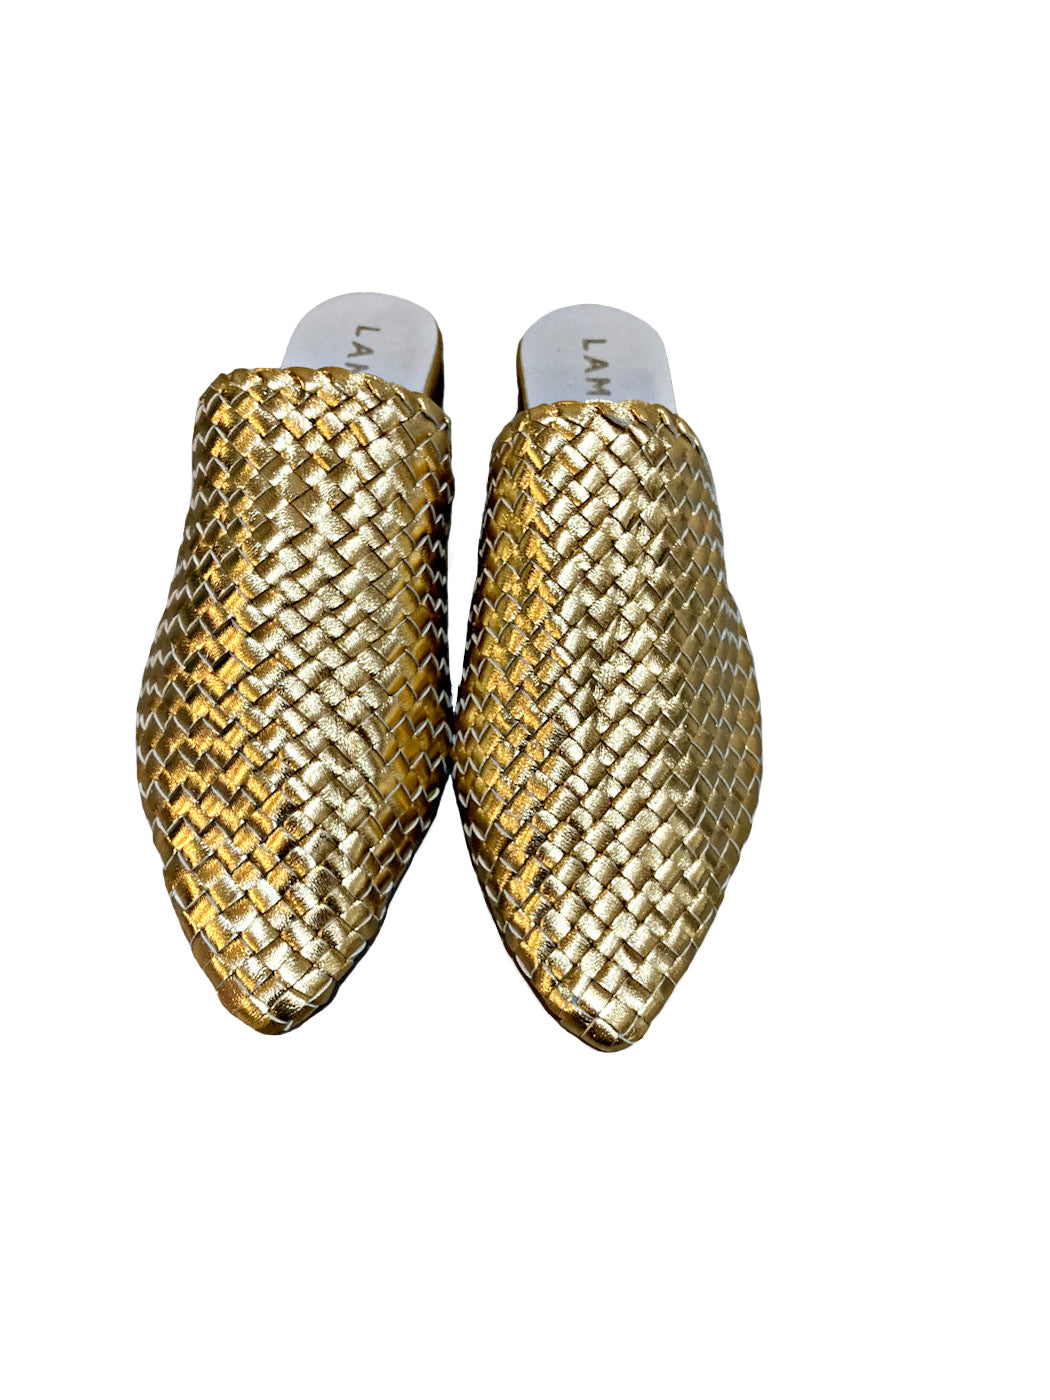 Woven Leather Babouche Gold Slides